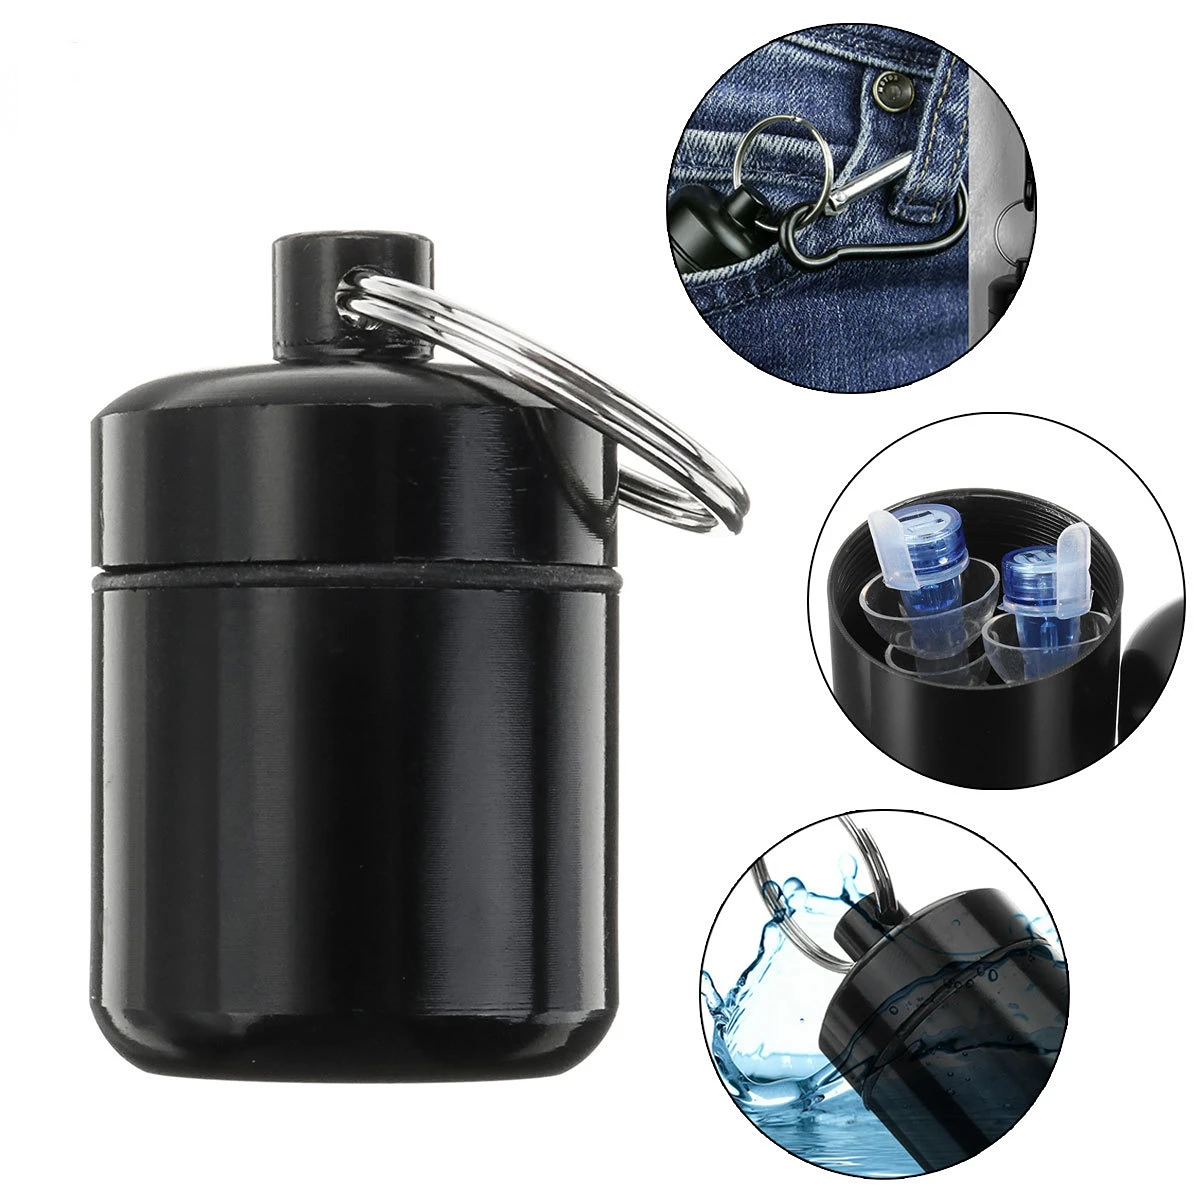 Aluminium Alloy Black Carrying Bottle Case For Silicone Musician Filter 